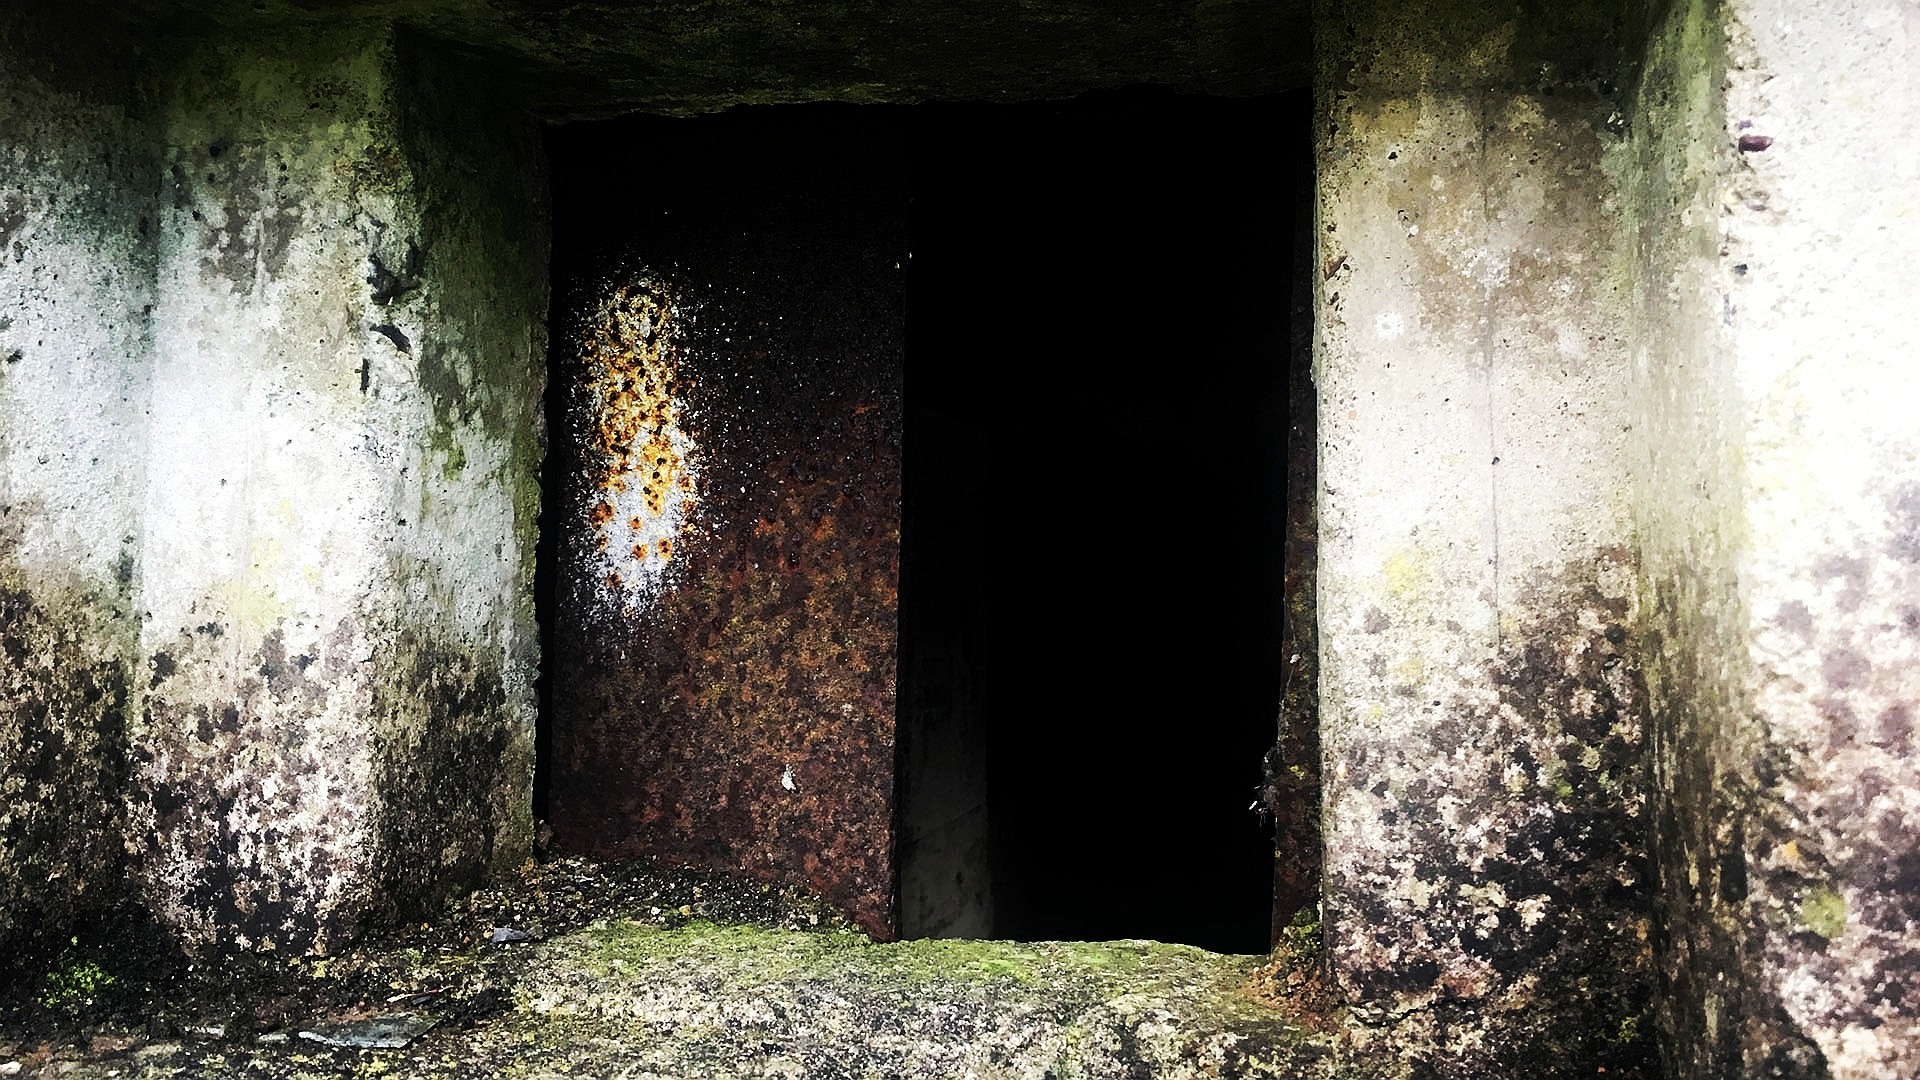 A steel shutter used to prevent flamethrower attack on the preserved Second World War era pillbox at Annagh Meadows, Portadown, Co. Armagh.